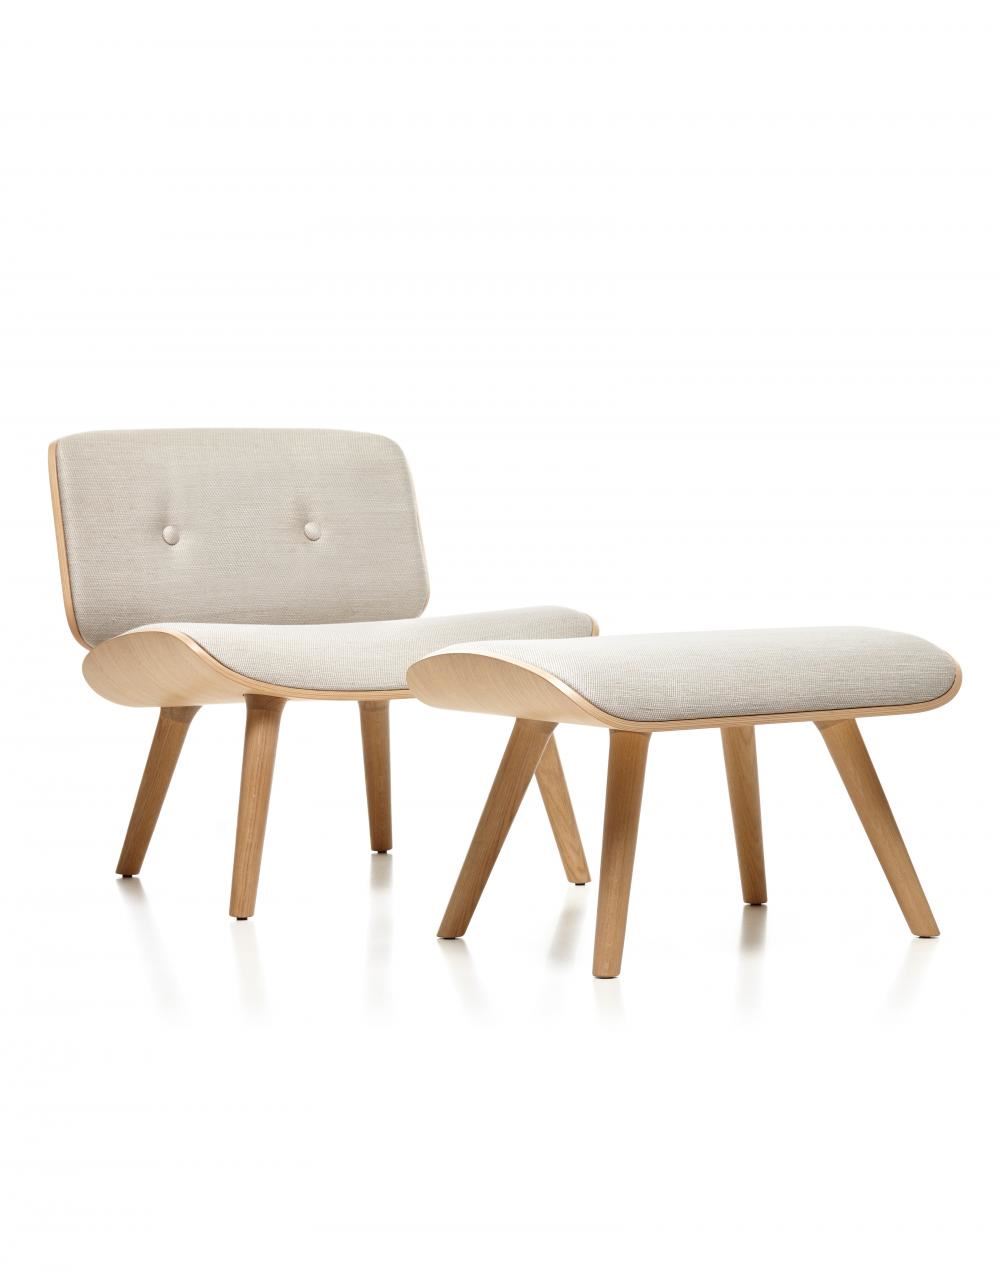 Nut Lounge Chair With Footstool